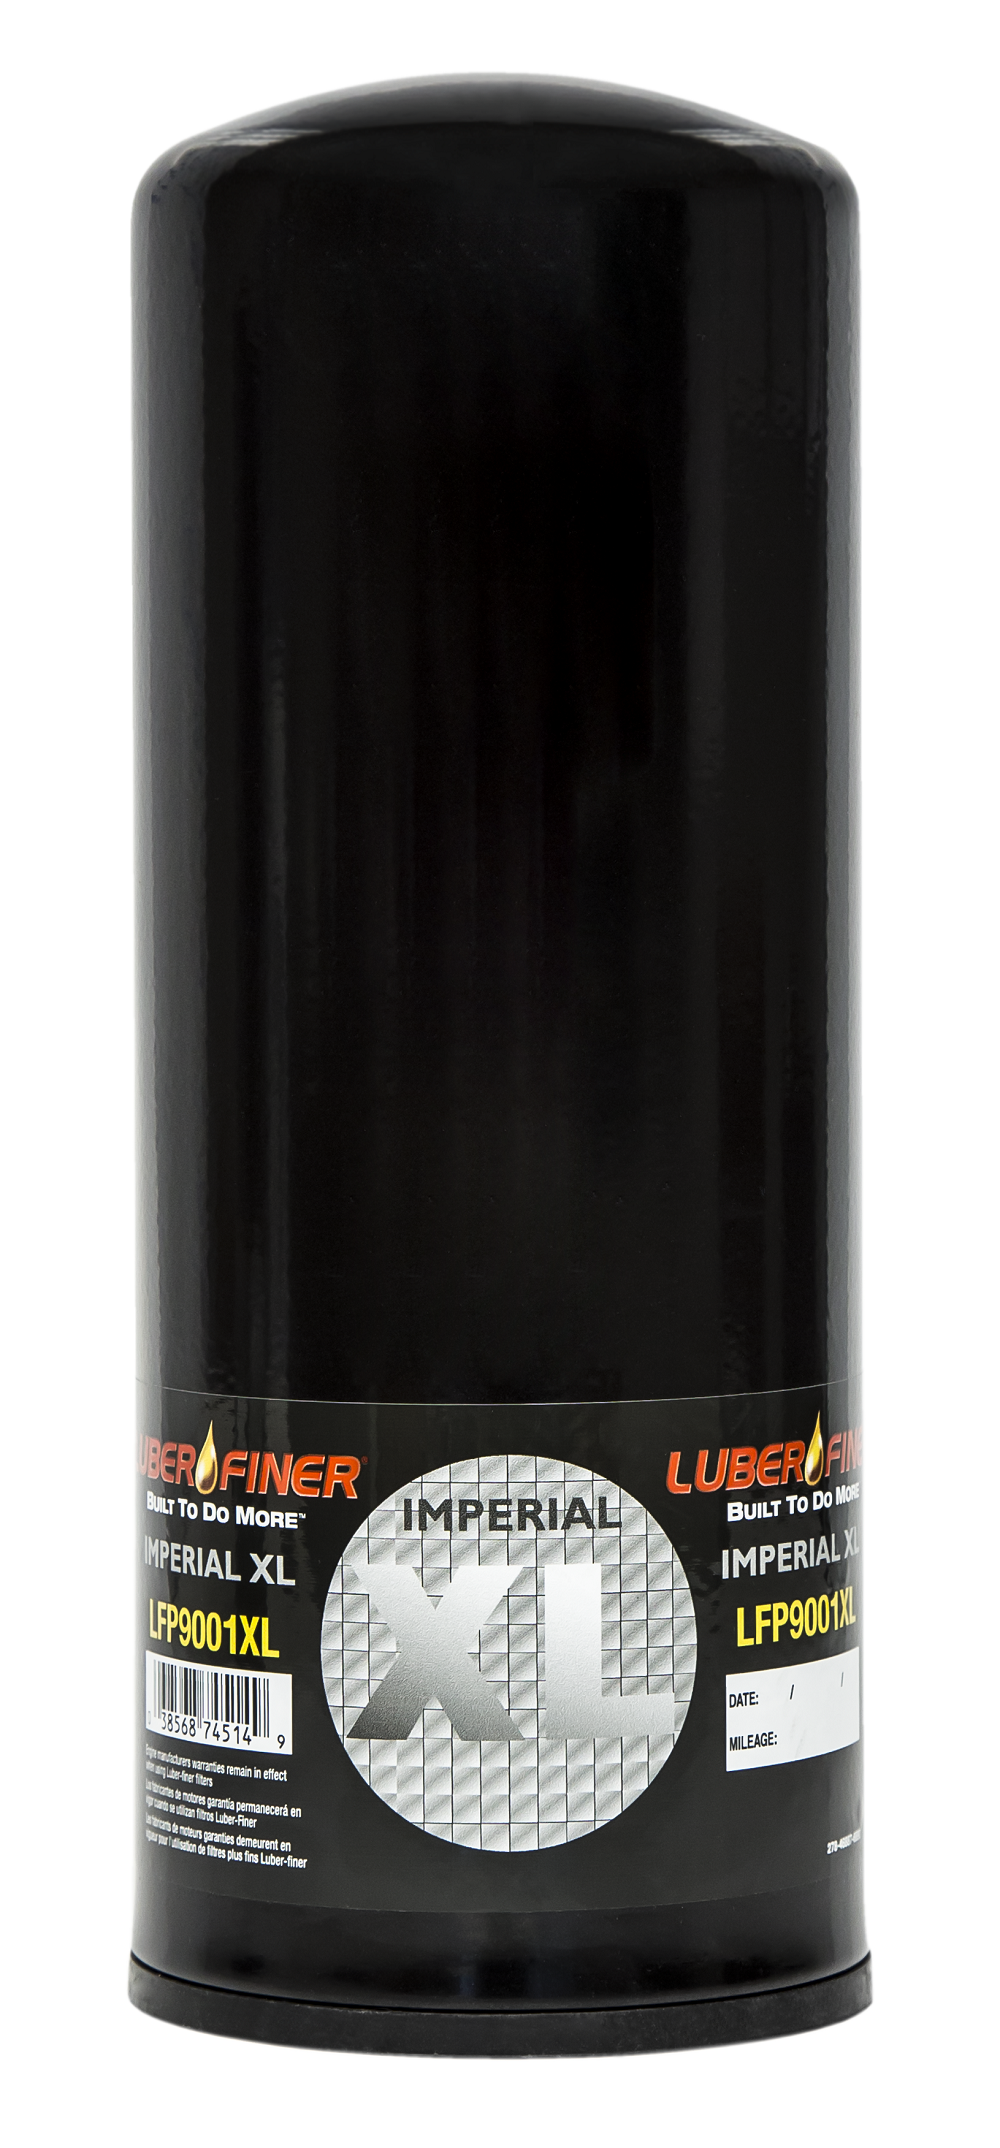 The LFP9001XL oil filter is designed for the Cummins ISX engine.